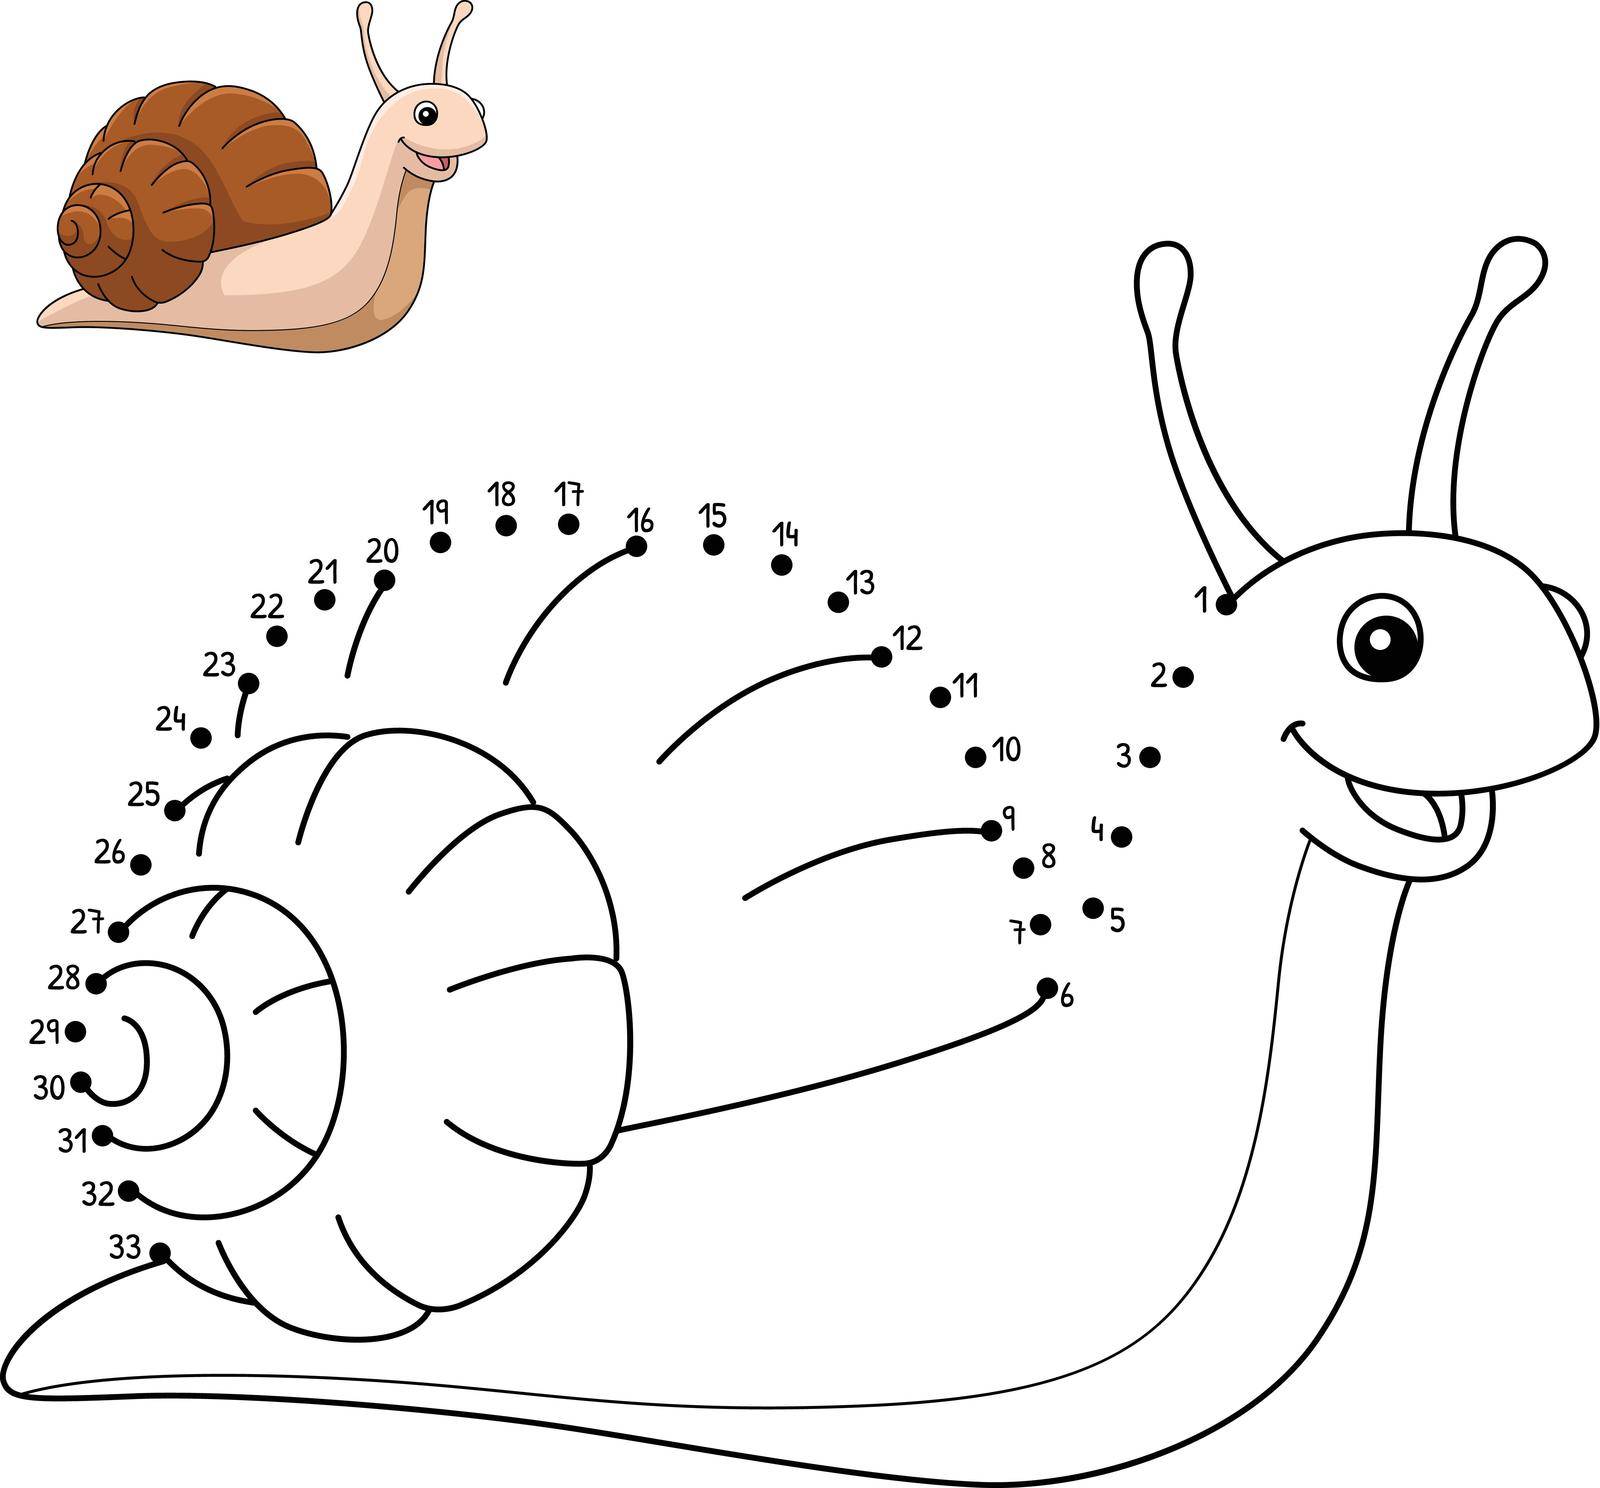 A cute and funny connect-the-dots coloring page of a Snail Animal. Provides hours of coloring fun for children. Color, this page is very easy. Suitable for little kids and toddlers.